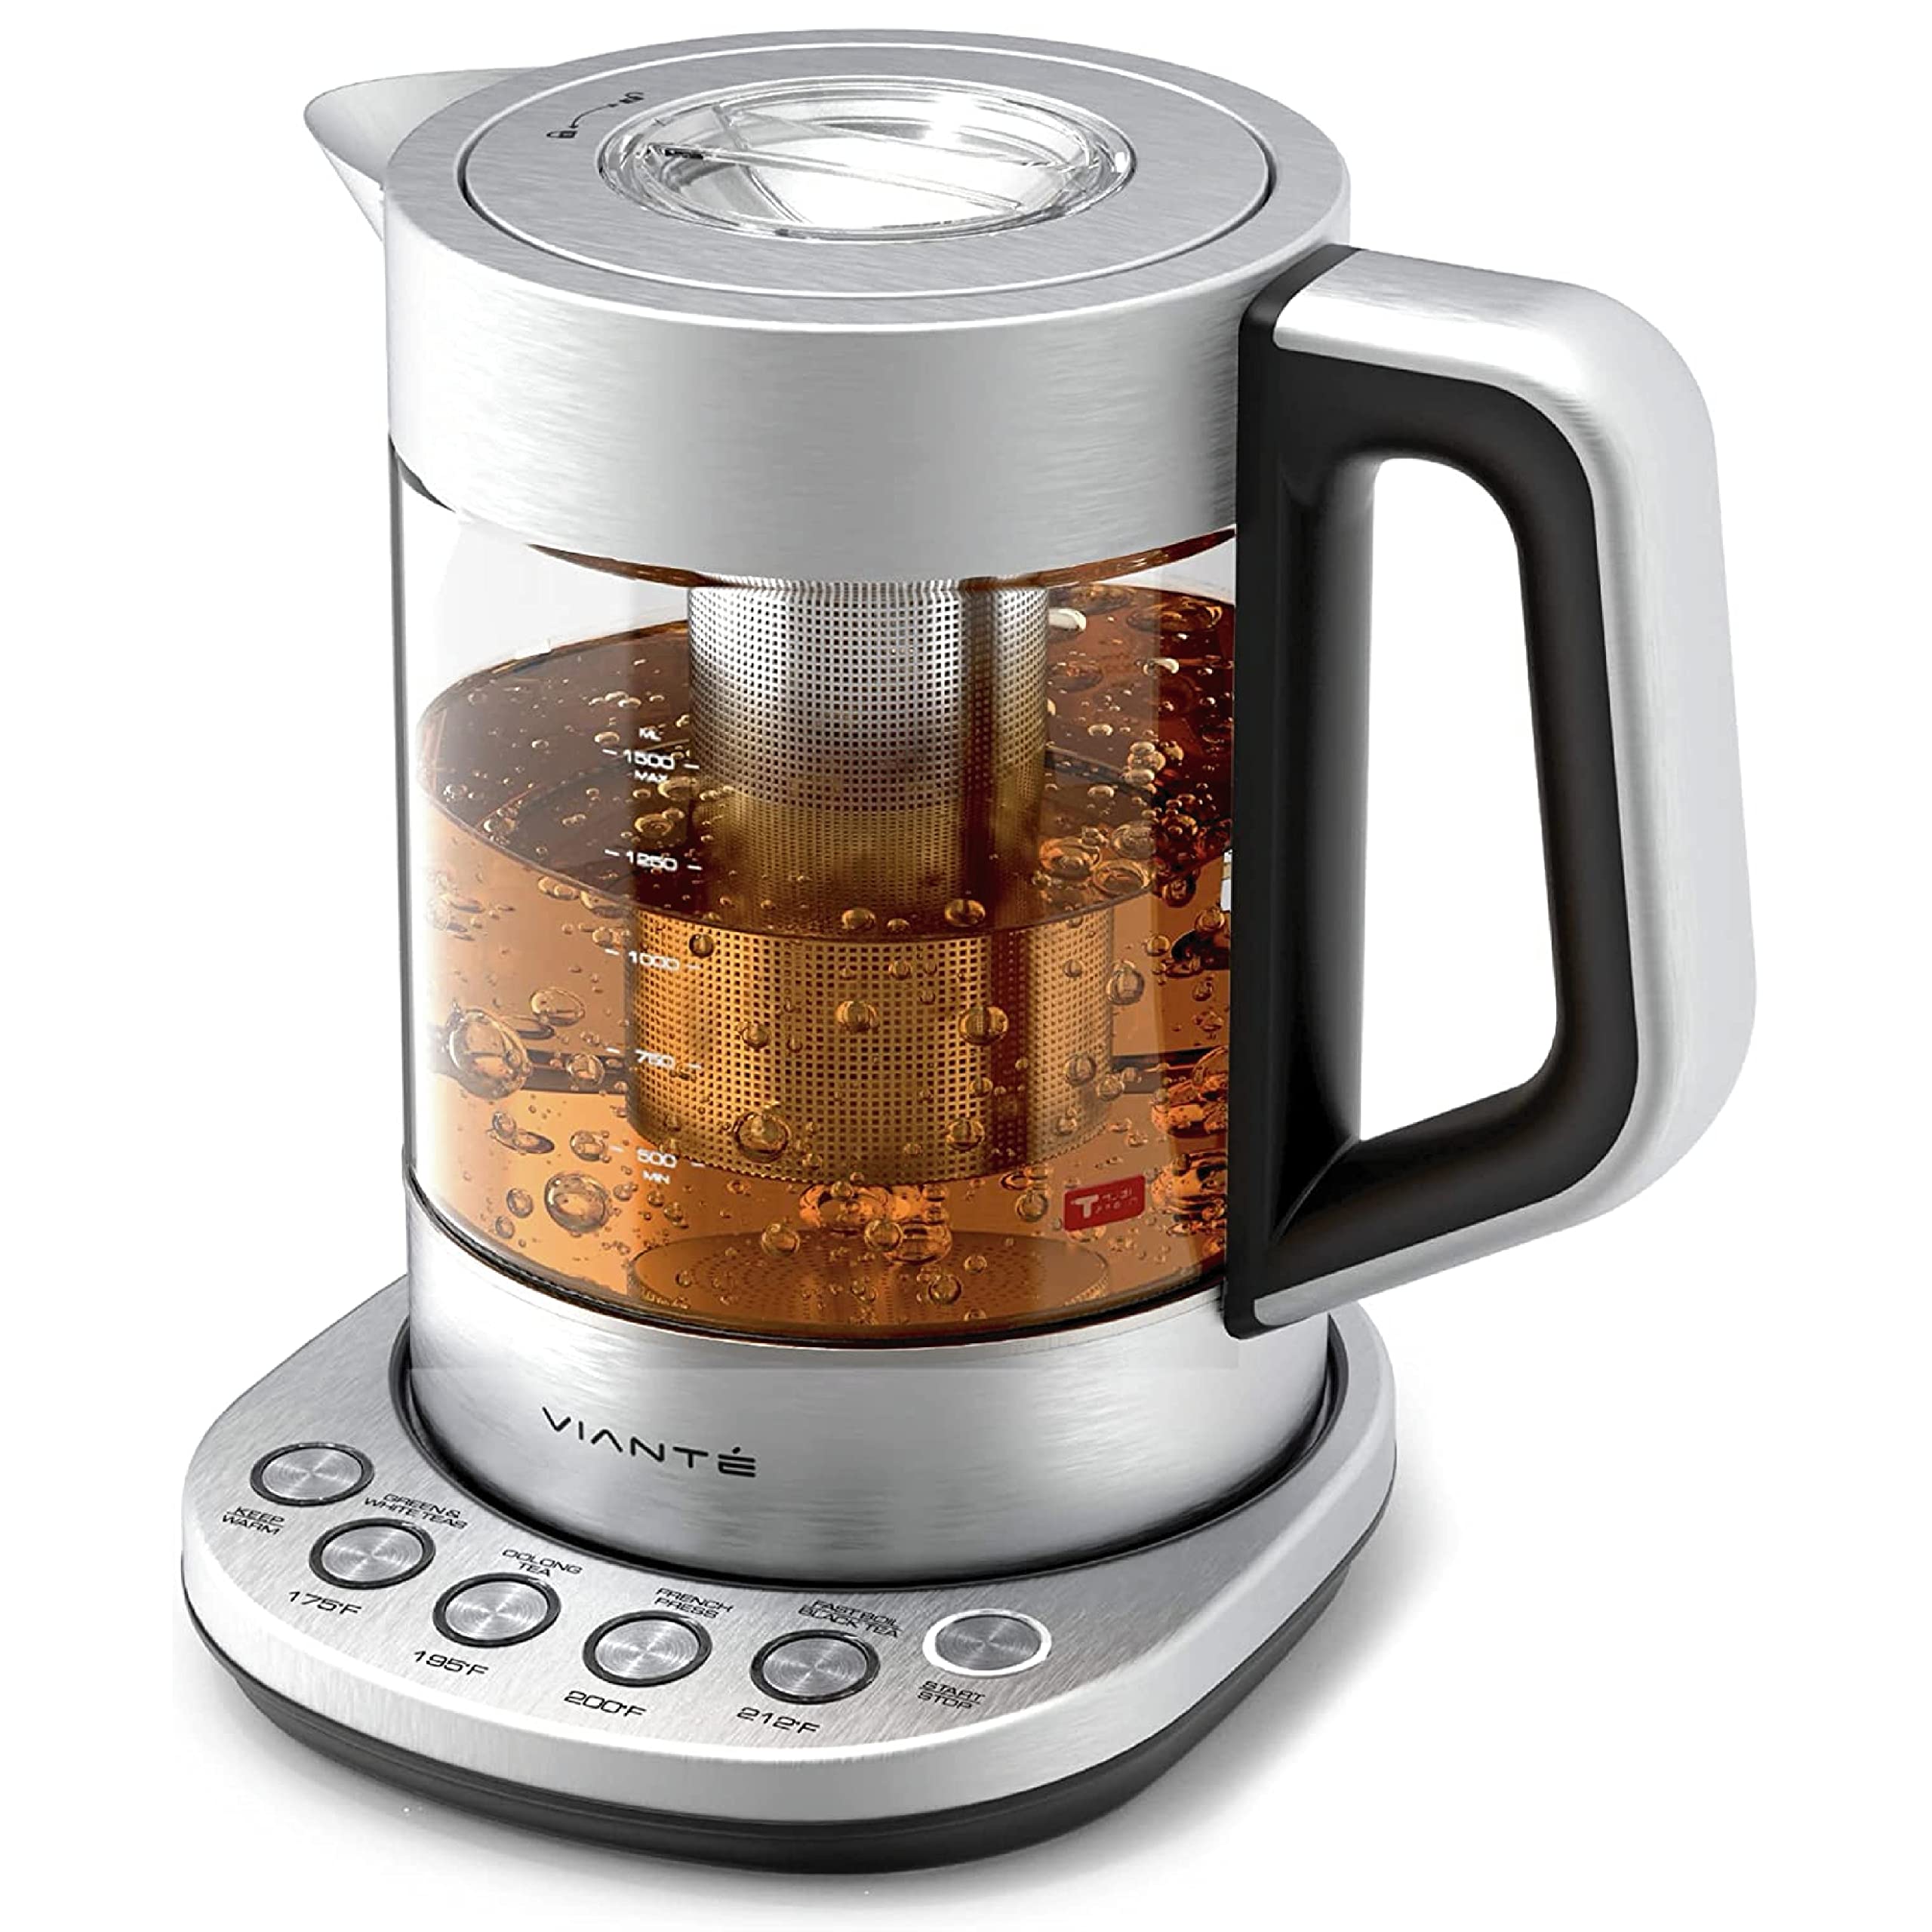 Hot Tea Maker Electric Glass Kettle with tea infuser and temperature control. Automatic Shut off. Brewing Programs for your favorite teas and Coffee.